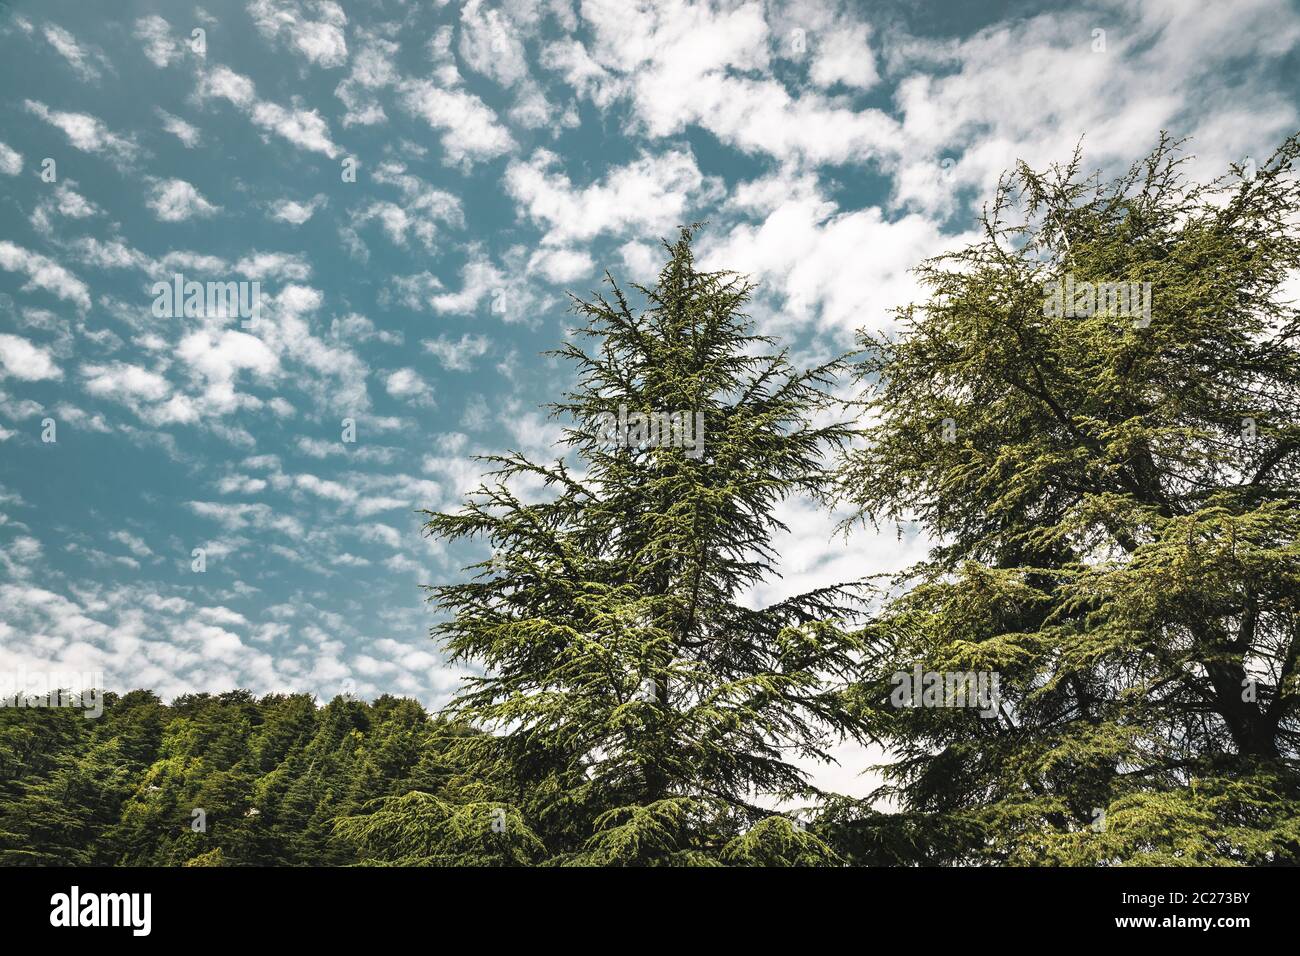 Amazing big cedar trees over beautiful cloudy sky background, endangered kind of evergreen trees, majestic nature of Lebanon, eco tourism Stock Photo